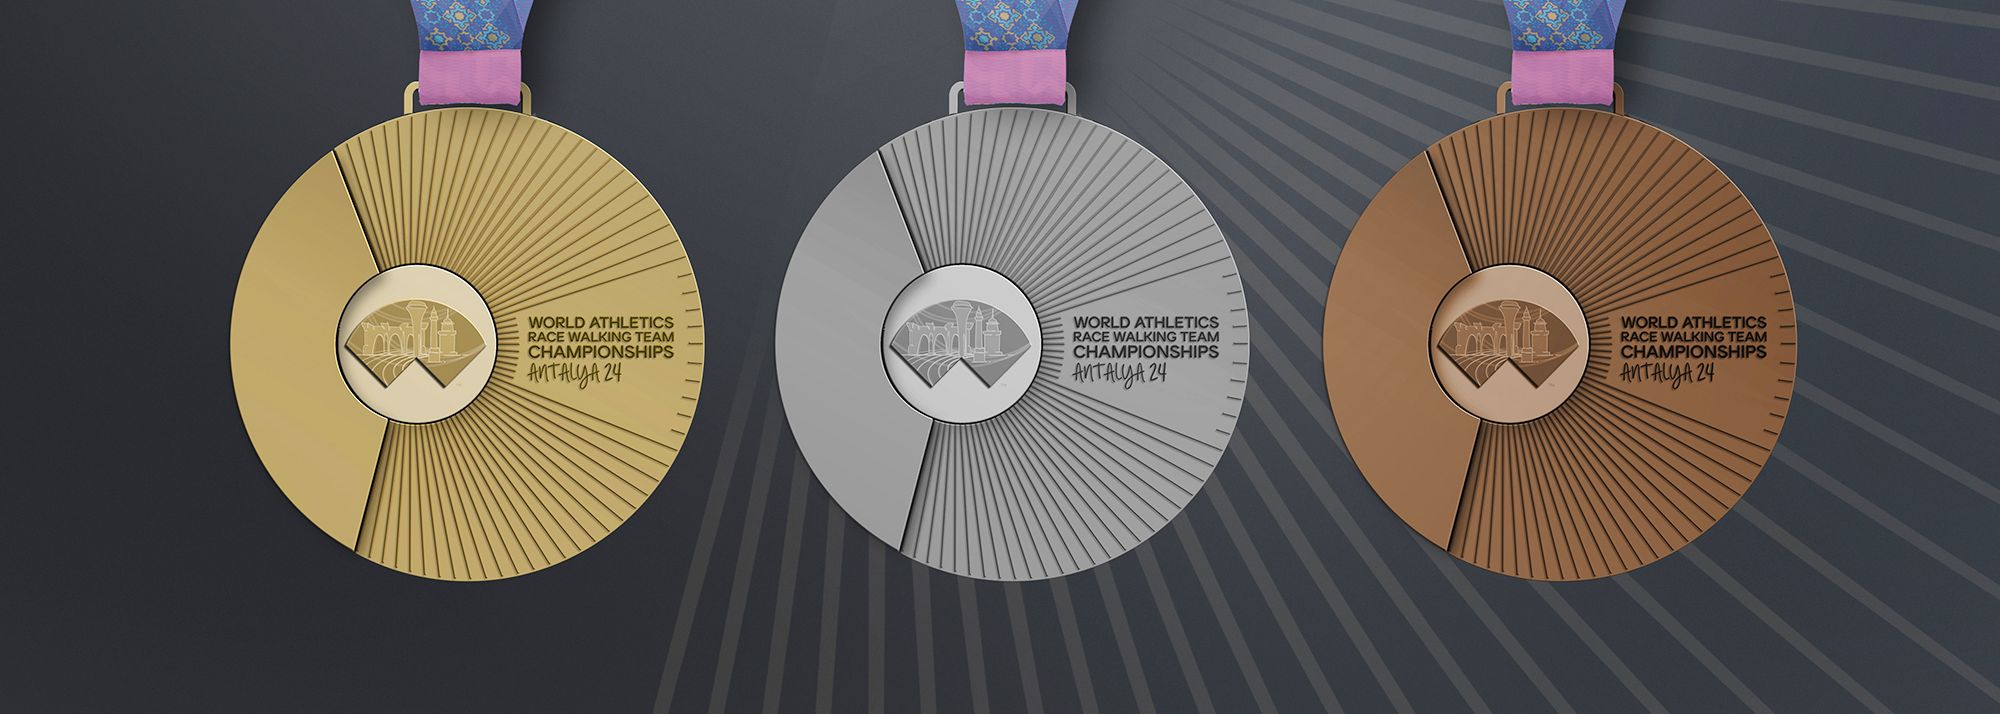 In the final countdown to the World Athletics Race Walking Team Championships Antalya 24, the medal design has been unveiled